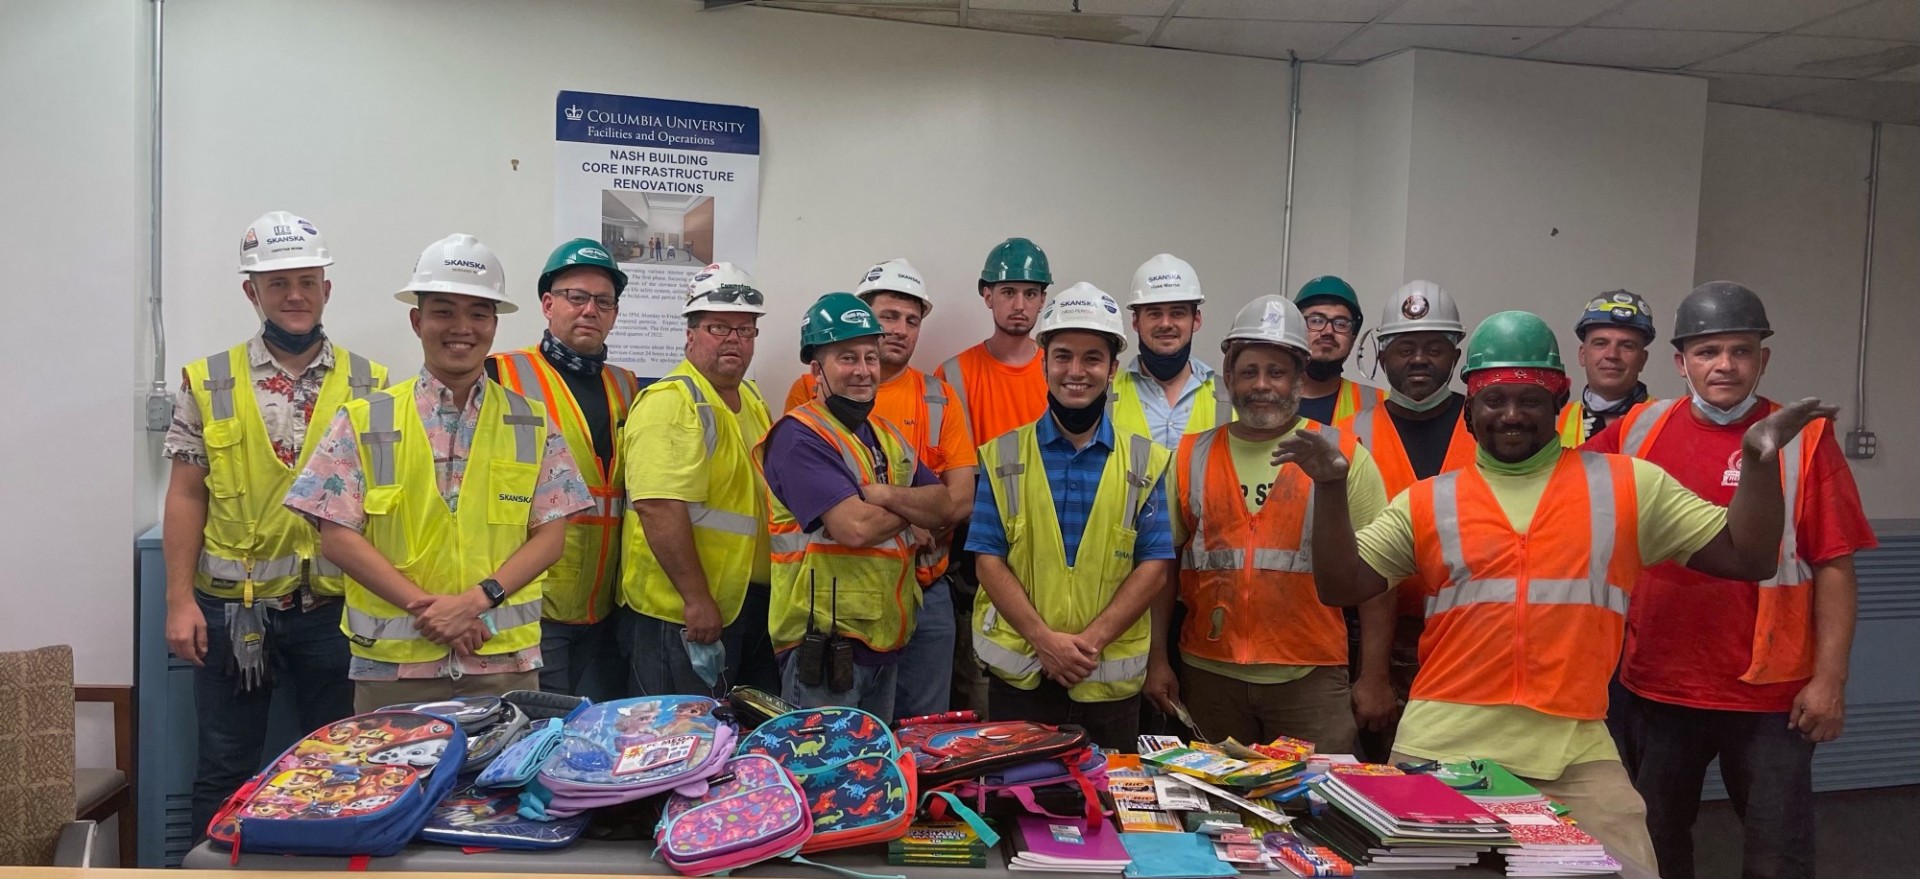 Facilities and Operations construction workers posing with backpacks collected